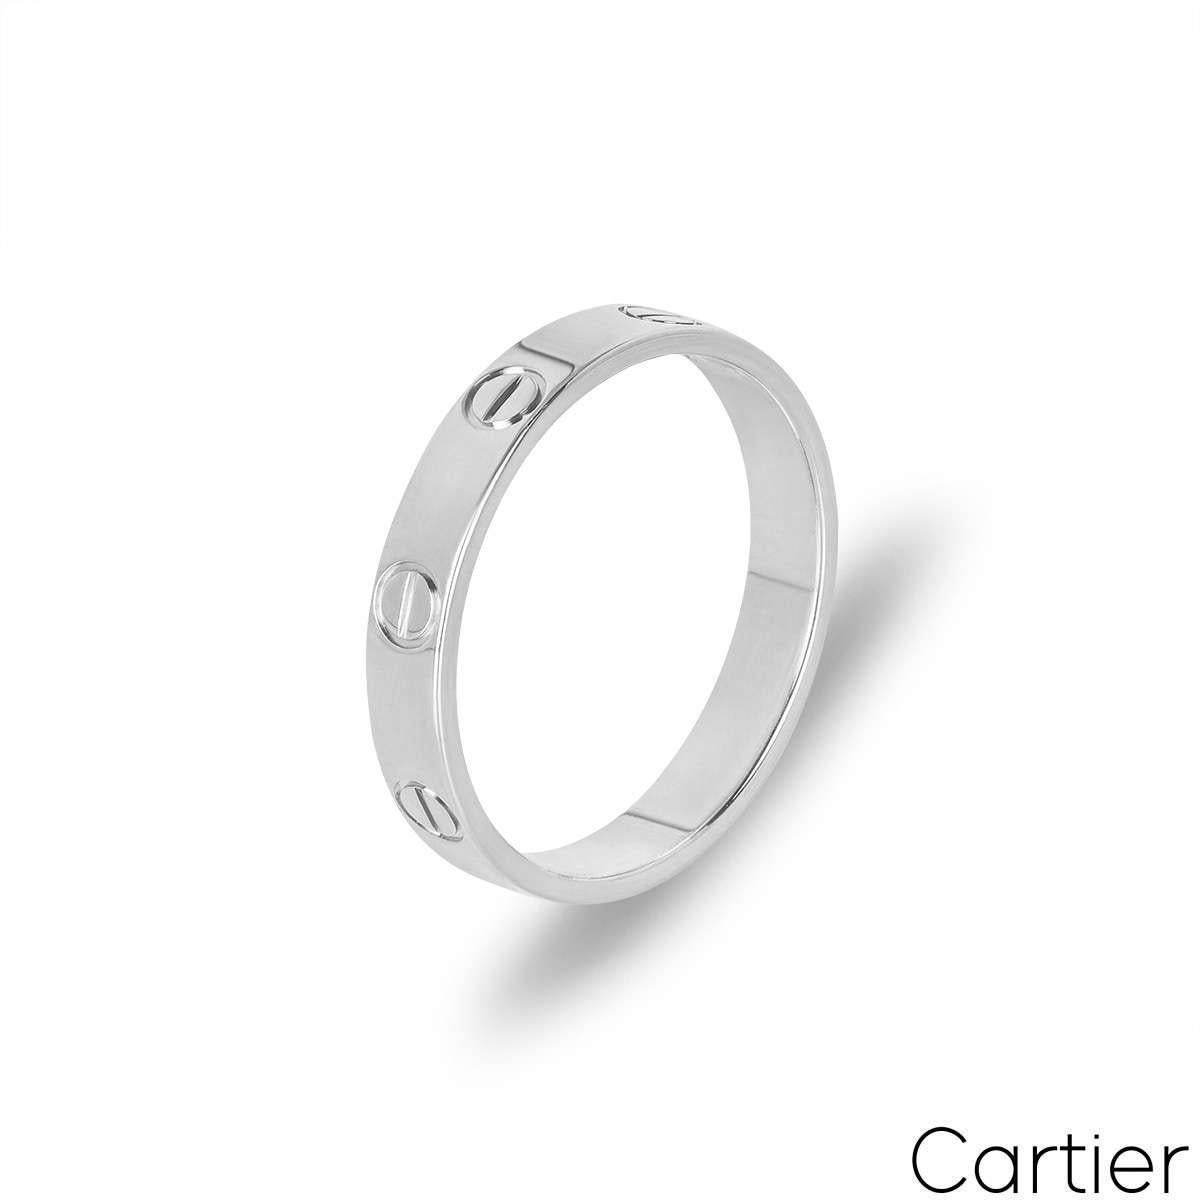 An 18k white gold Cartier wedding band from the Love collection. The ring comprises of the iconic Cartier screws and is a size UK O - EU 54. Measuring 3.6mm in width with a gross weight of 3.5 grams.

Comes complete with a RichDiamonds presentation